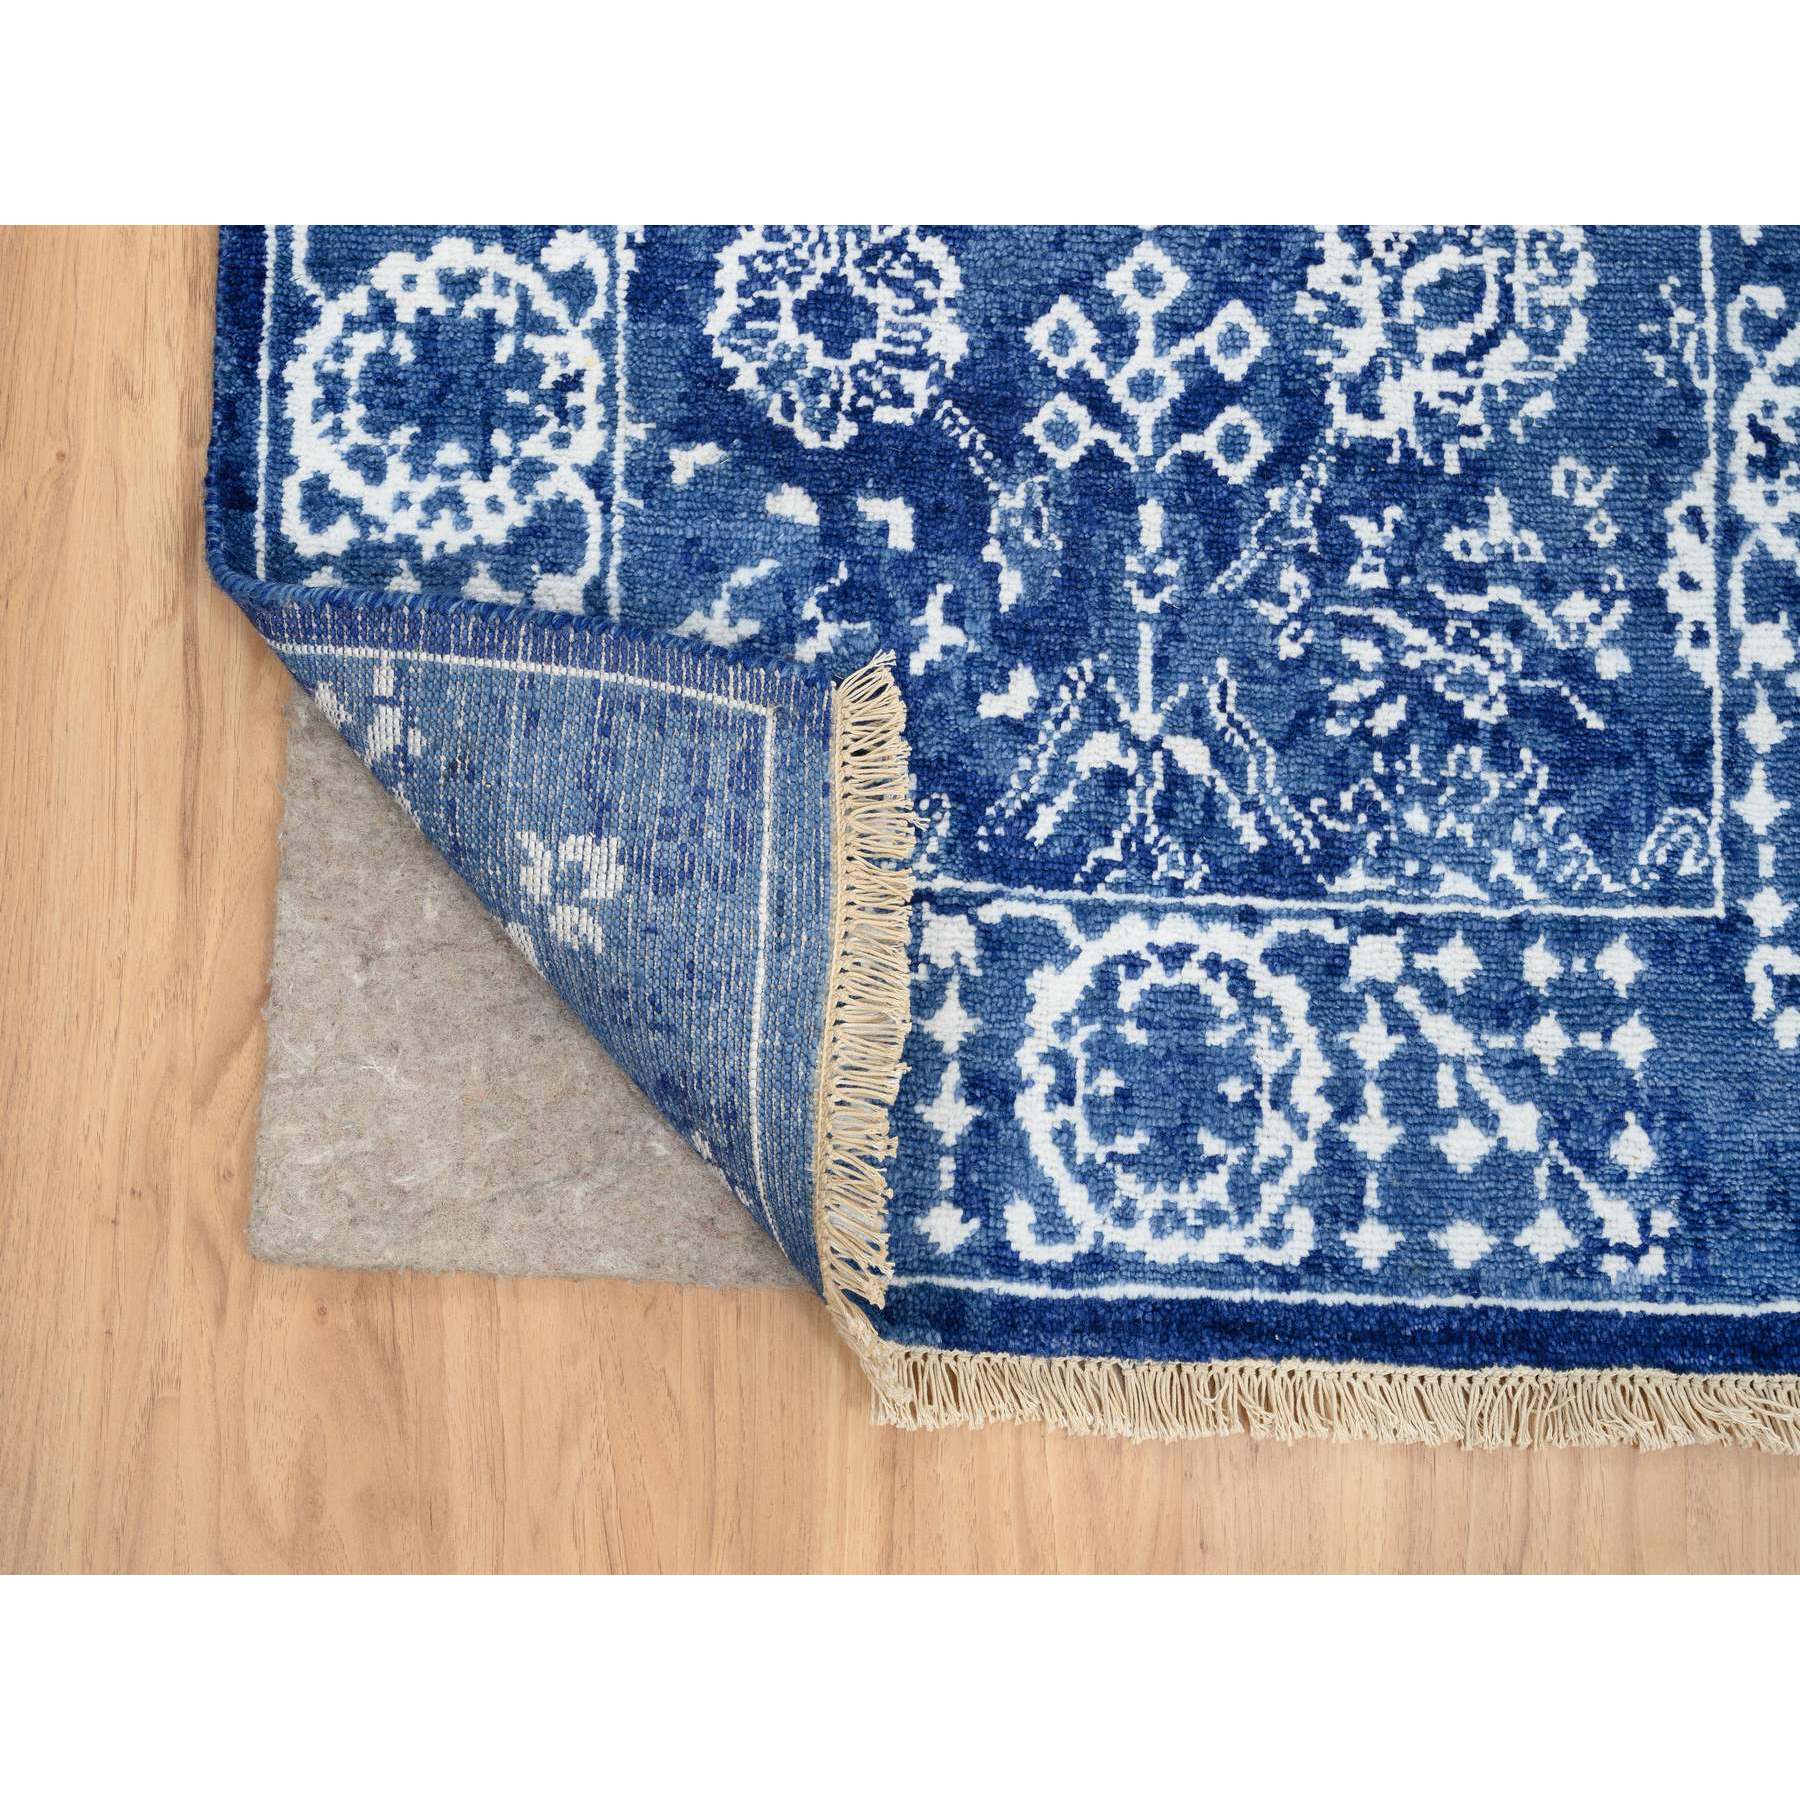 2'7"x12' Denim Blue, Tabriz with All Over Motifs Tone on Tone, Wool and Silk Hand Woven, Runner Oriental Rug 